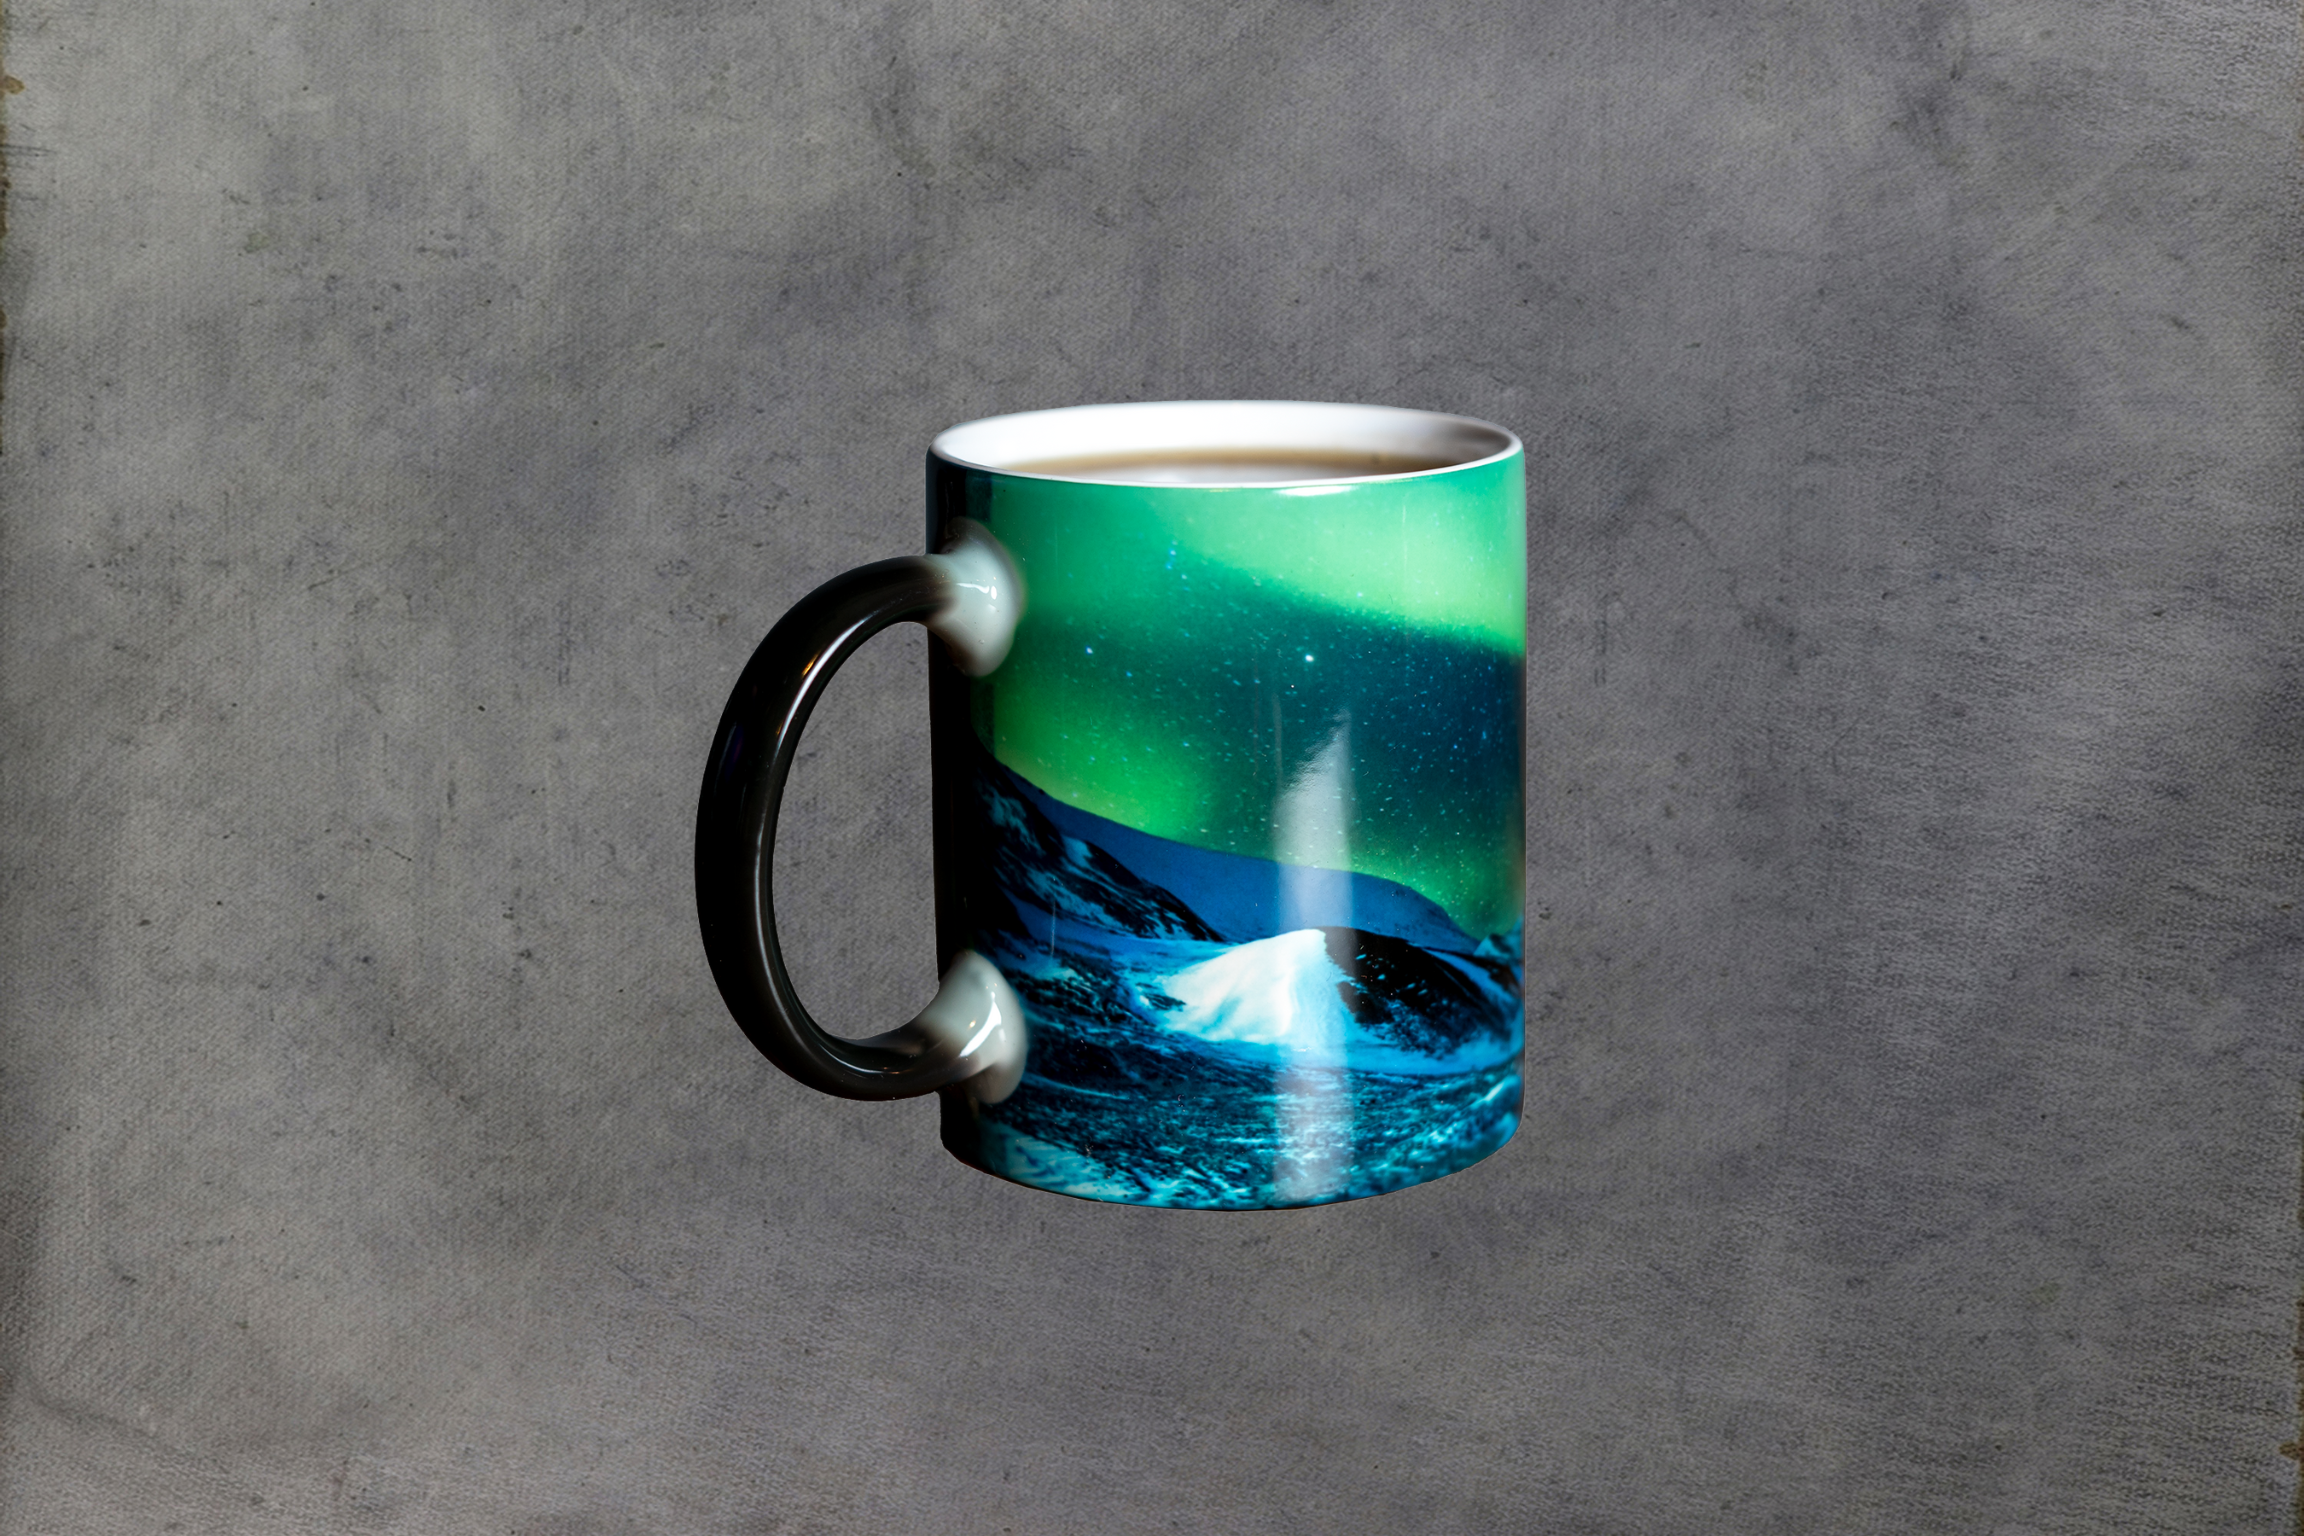 Chena Hot Springs Resort mug with green and blue aurora over a snowy mountain landscape.